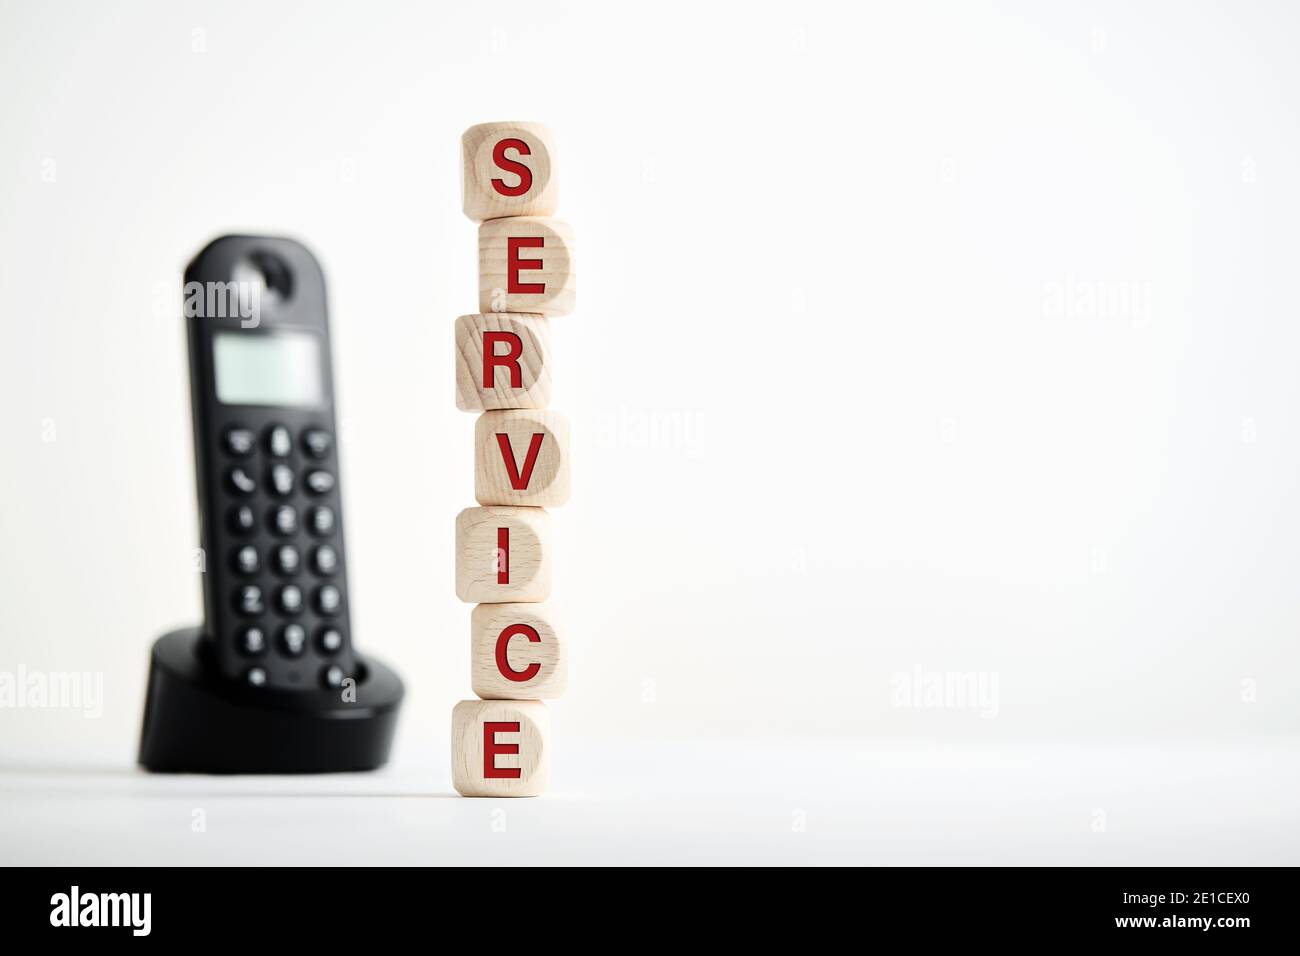 The word service on wooden block with telephone background. Business concept for asking guidance, support or technical help. Stock Photo